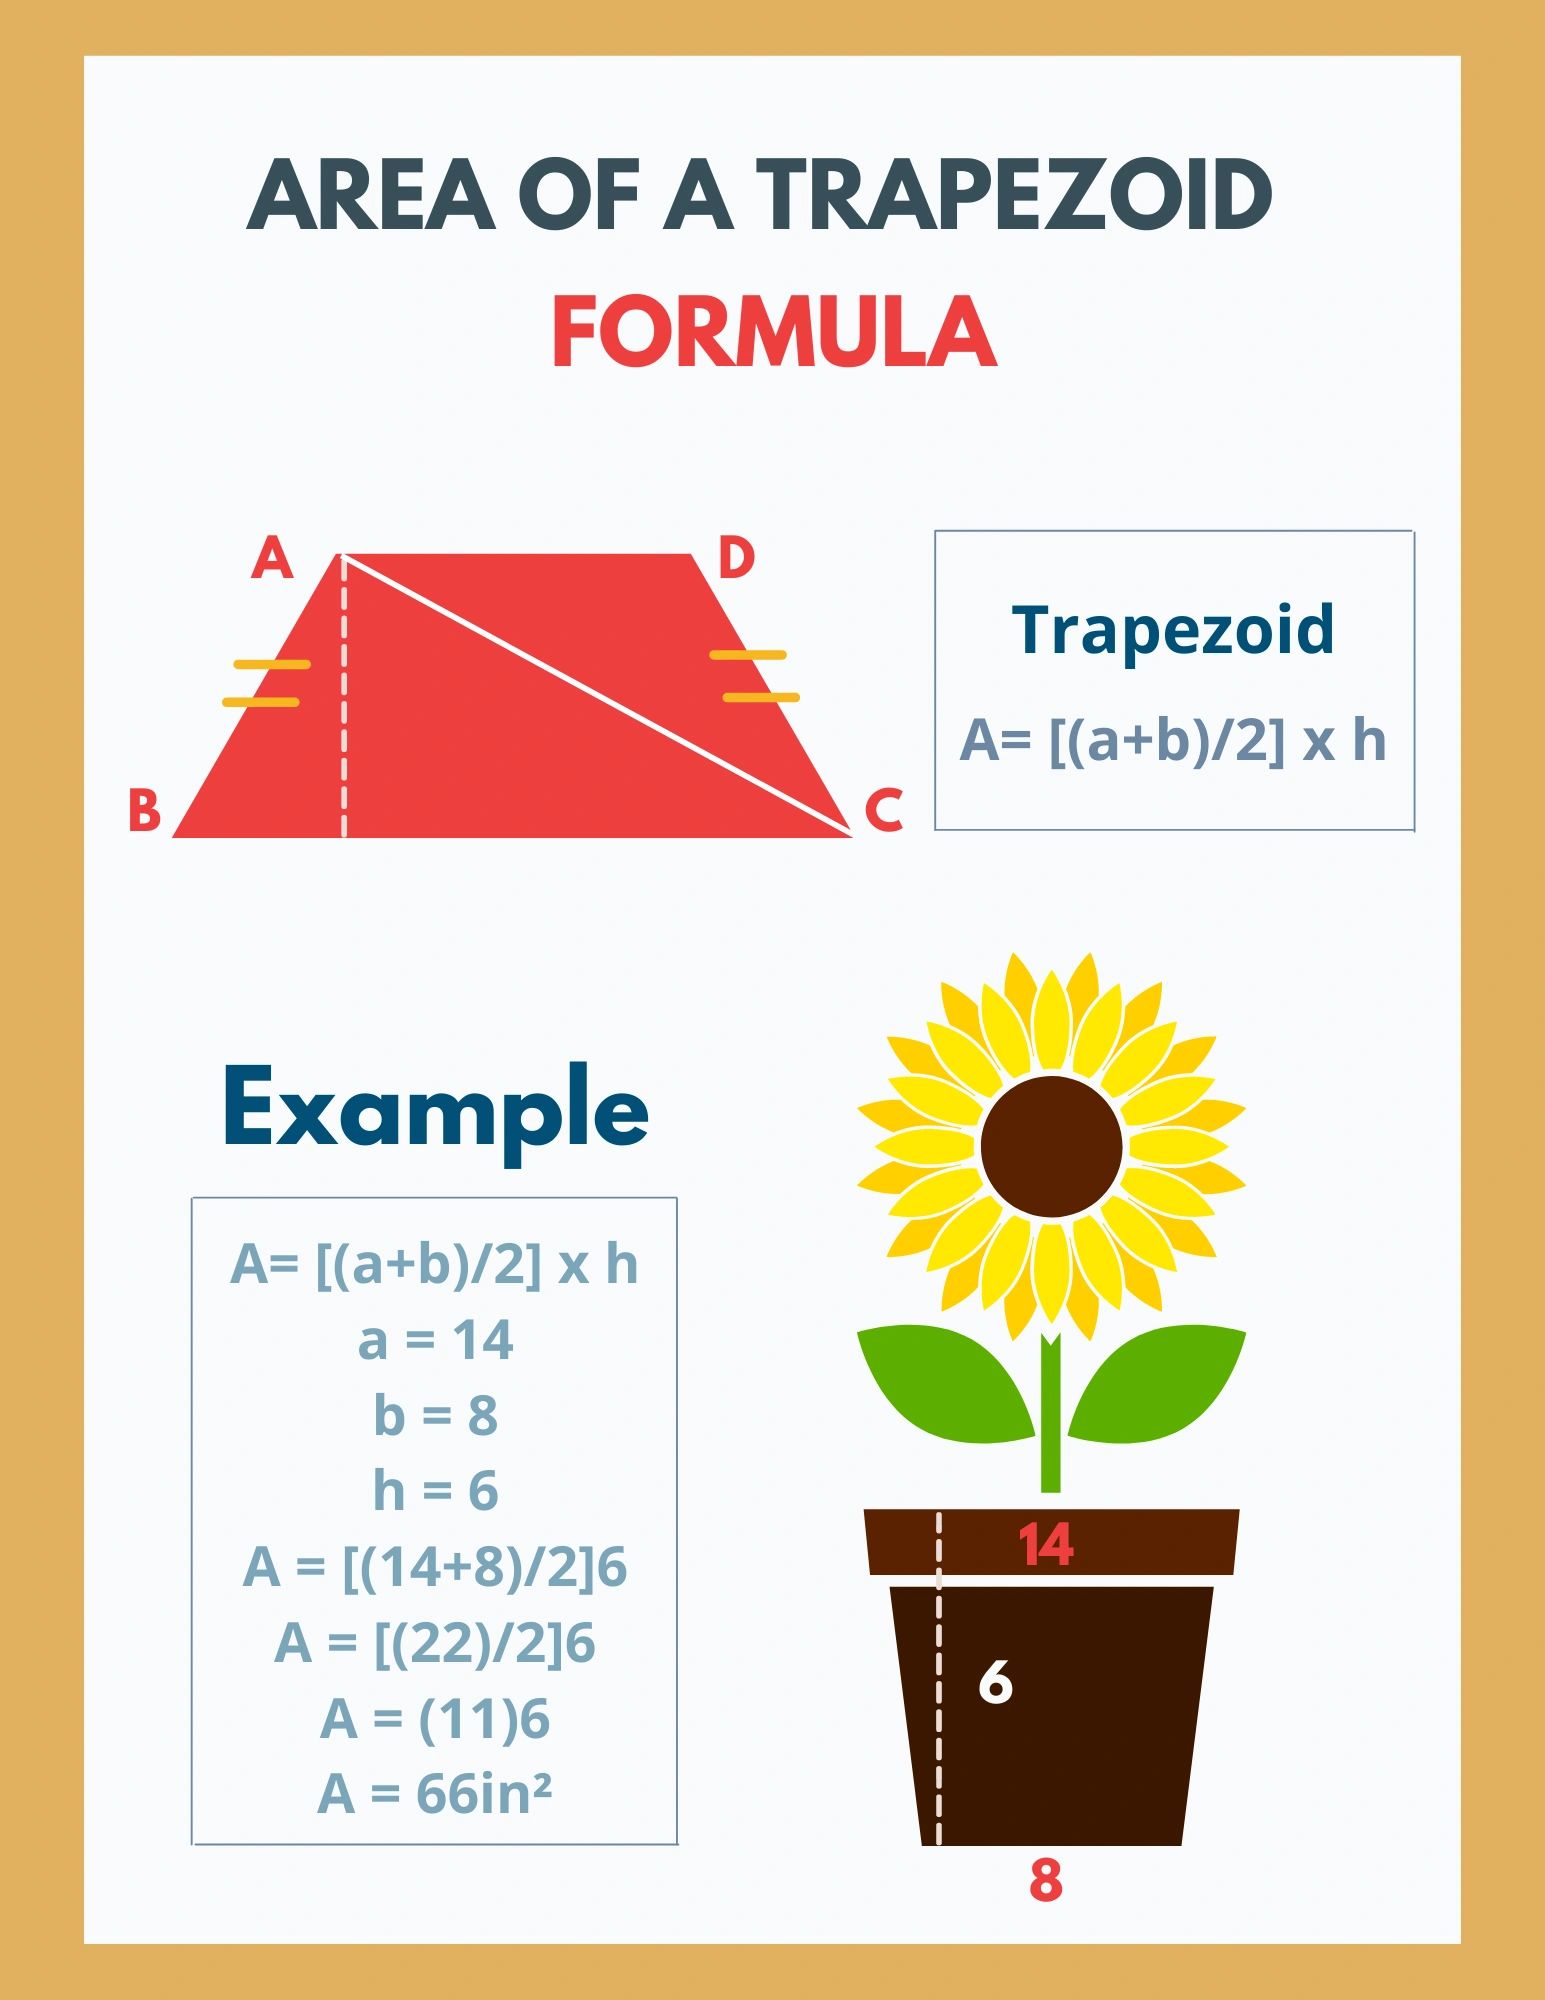 How to Find the Area of a Trapezoid